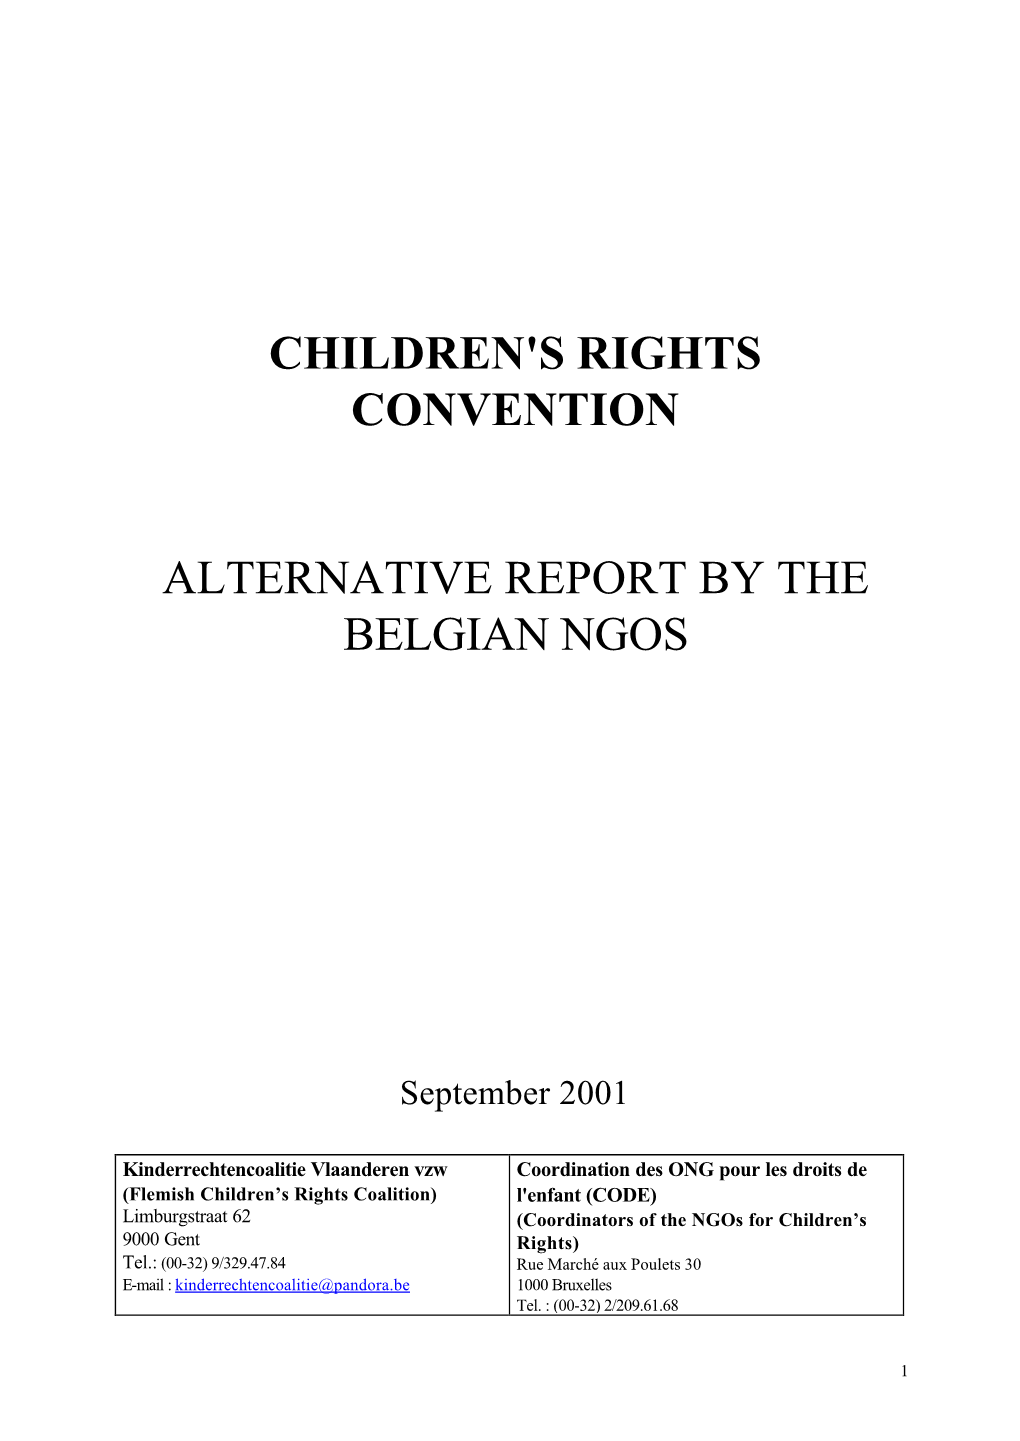 Children's Rights Convention Alternative Report by The